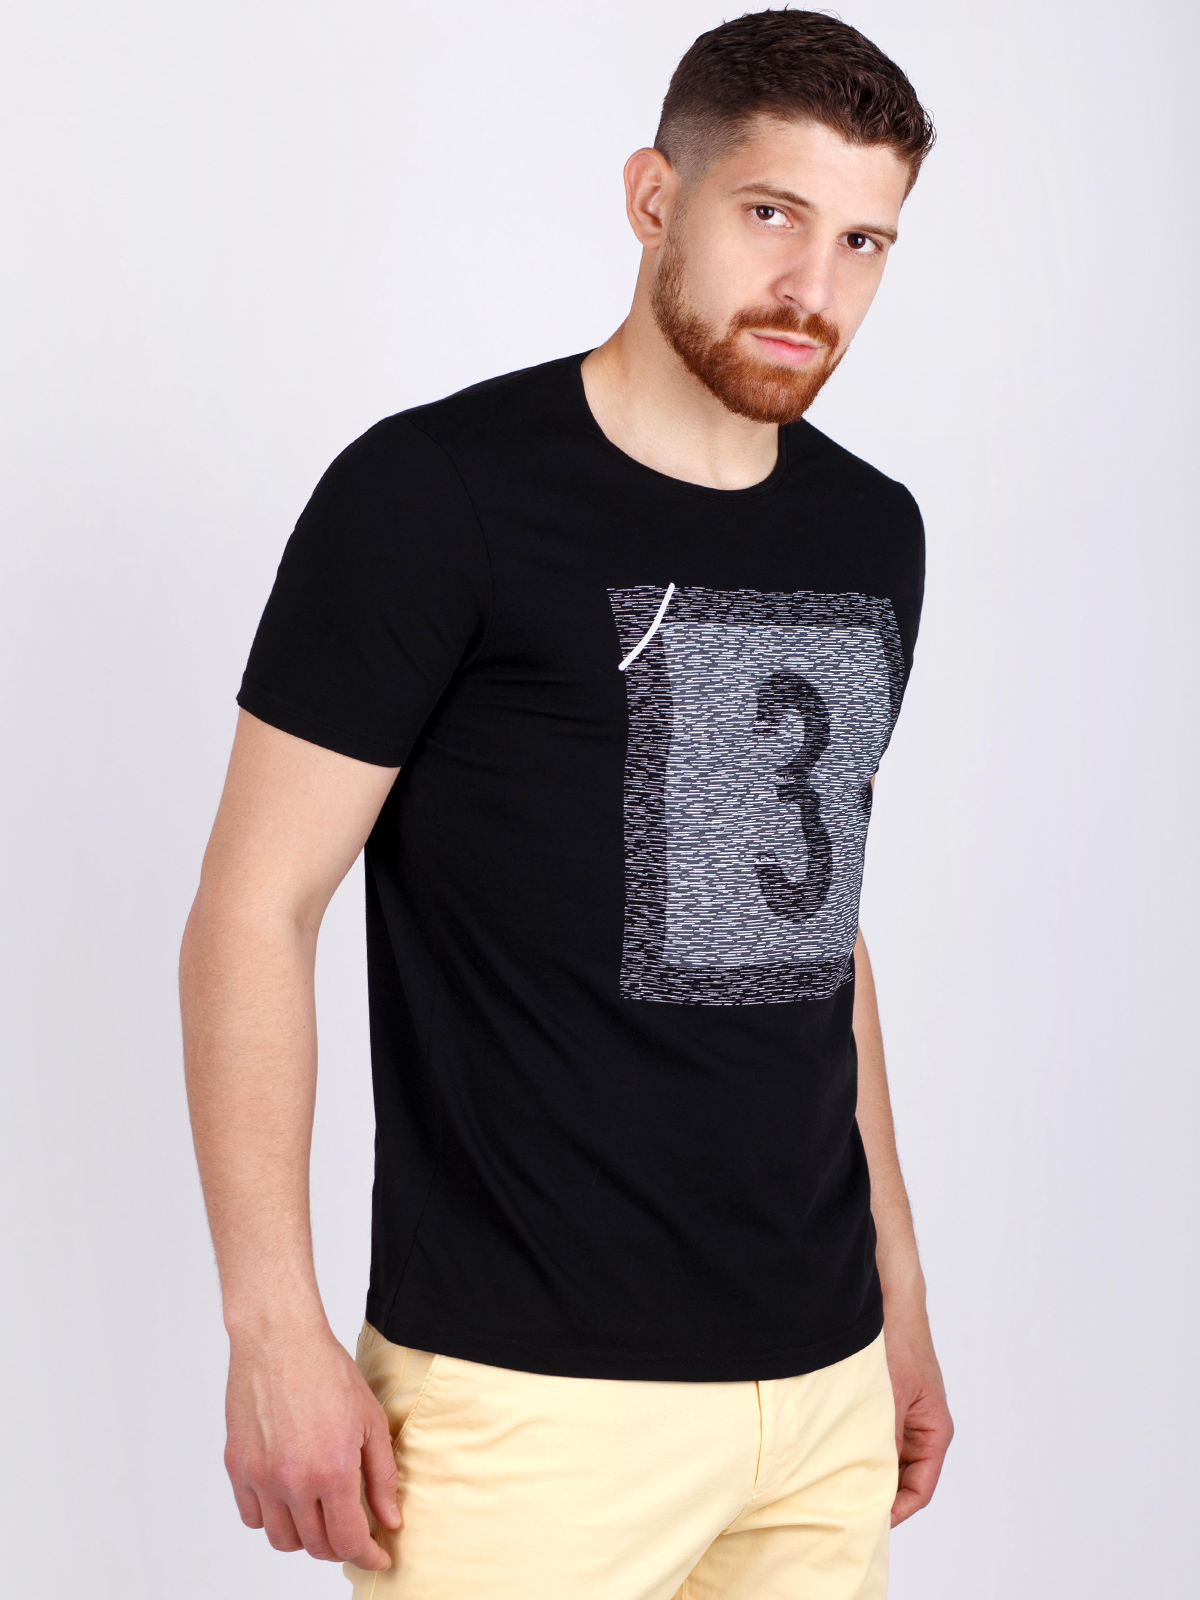 Black tshirt with a panel in gray melan - 96415 € 16.31 img2